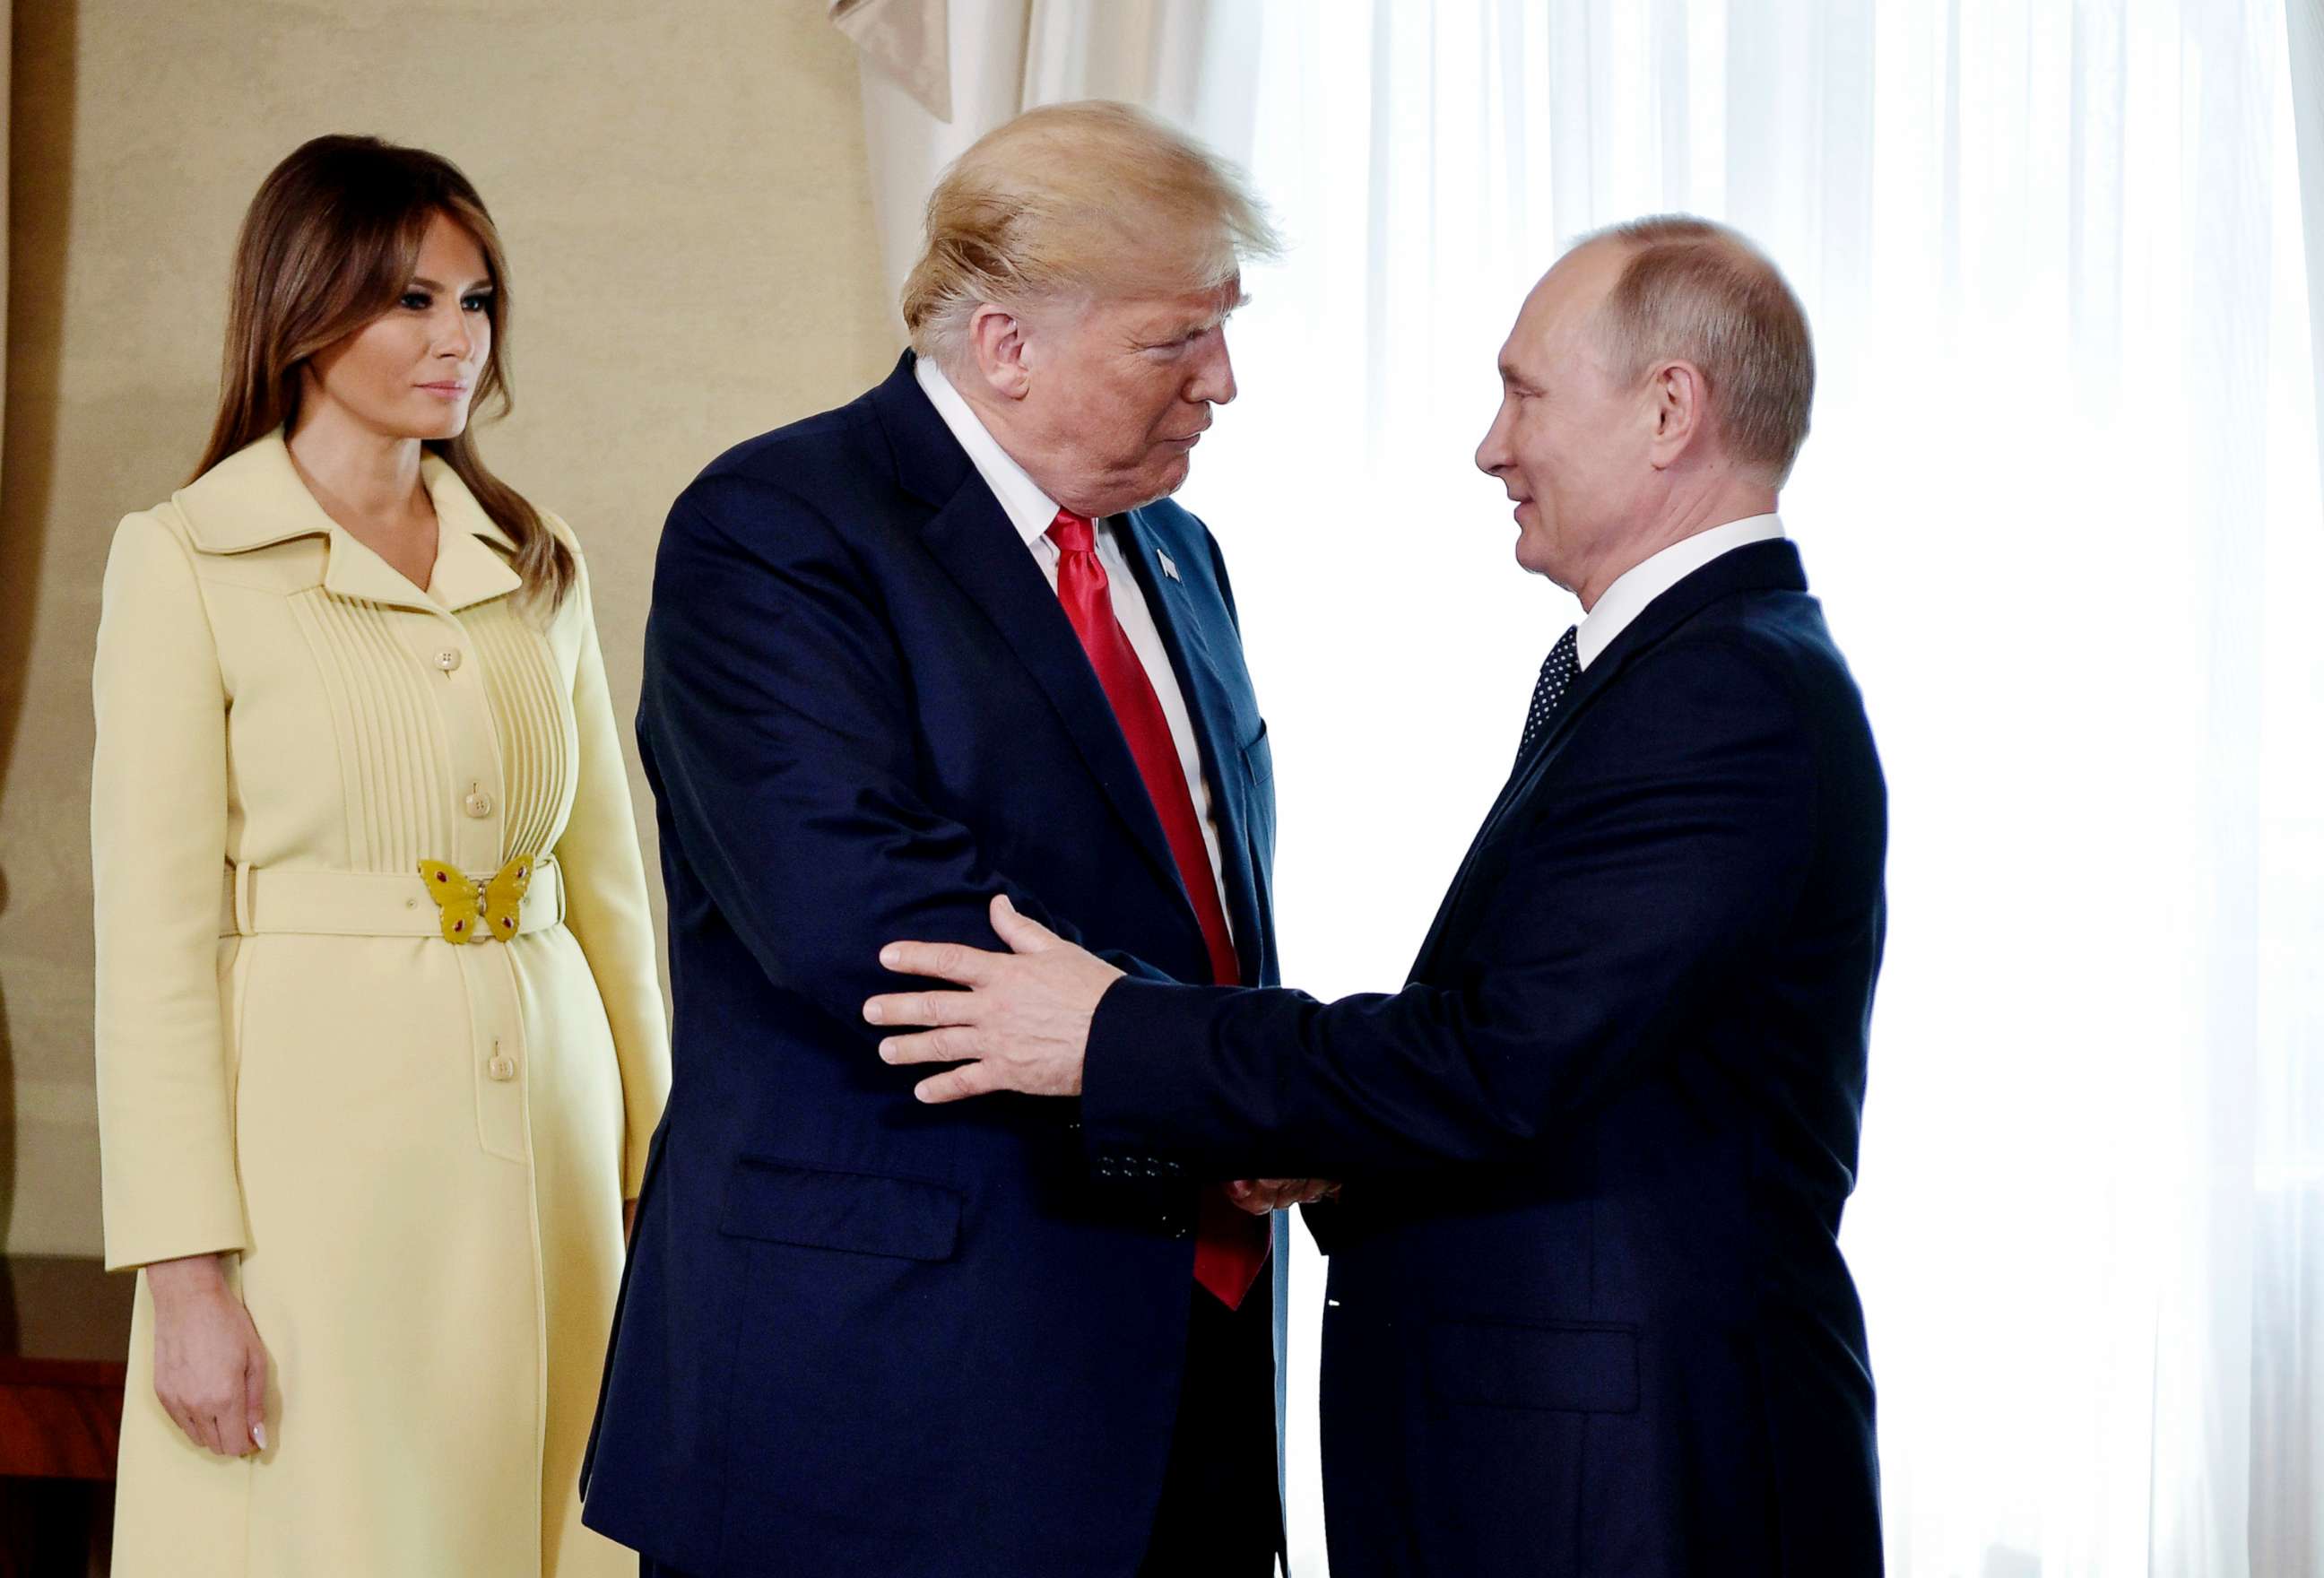 PHOTO: First lady Melania Trump, left, President Donald Trump and Russian President Vladimir Putin welcome each other at the Presidential Palace in Helsinki, Finland, July 16, 2018, prior to Trump's and Putin's one-on-one meeting in the Finnish capital.